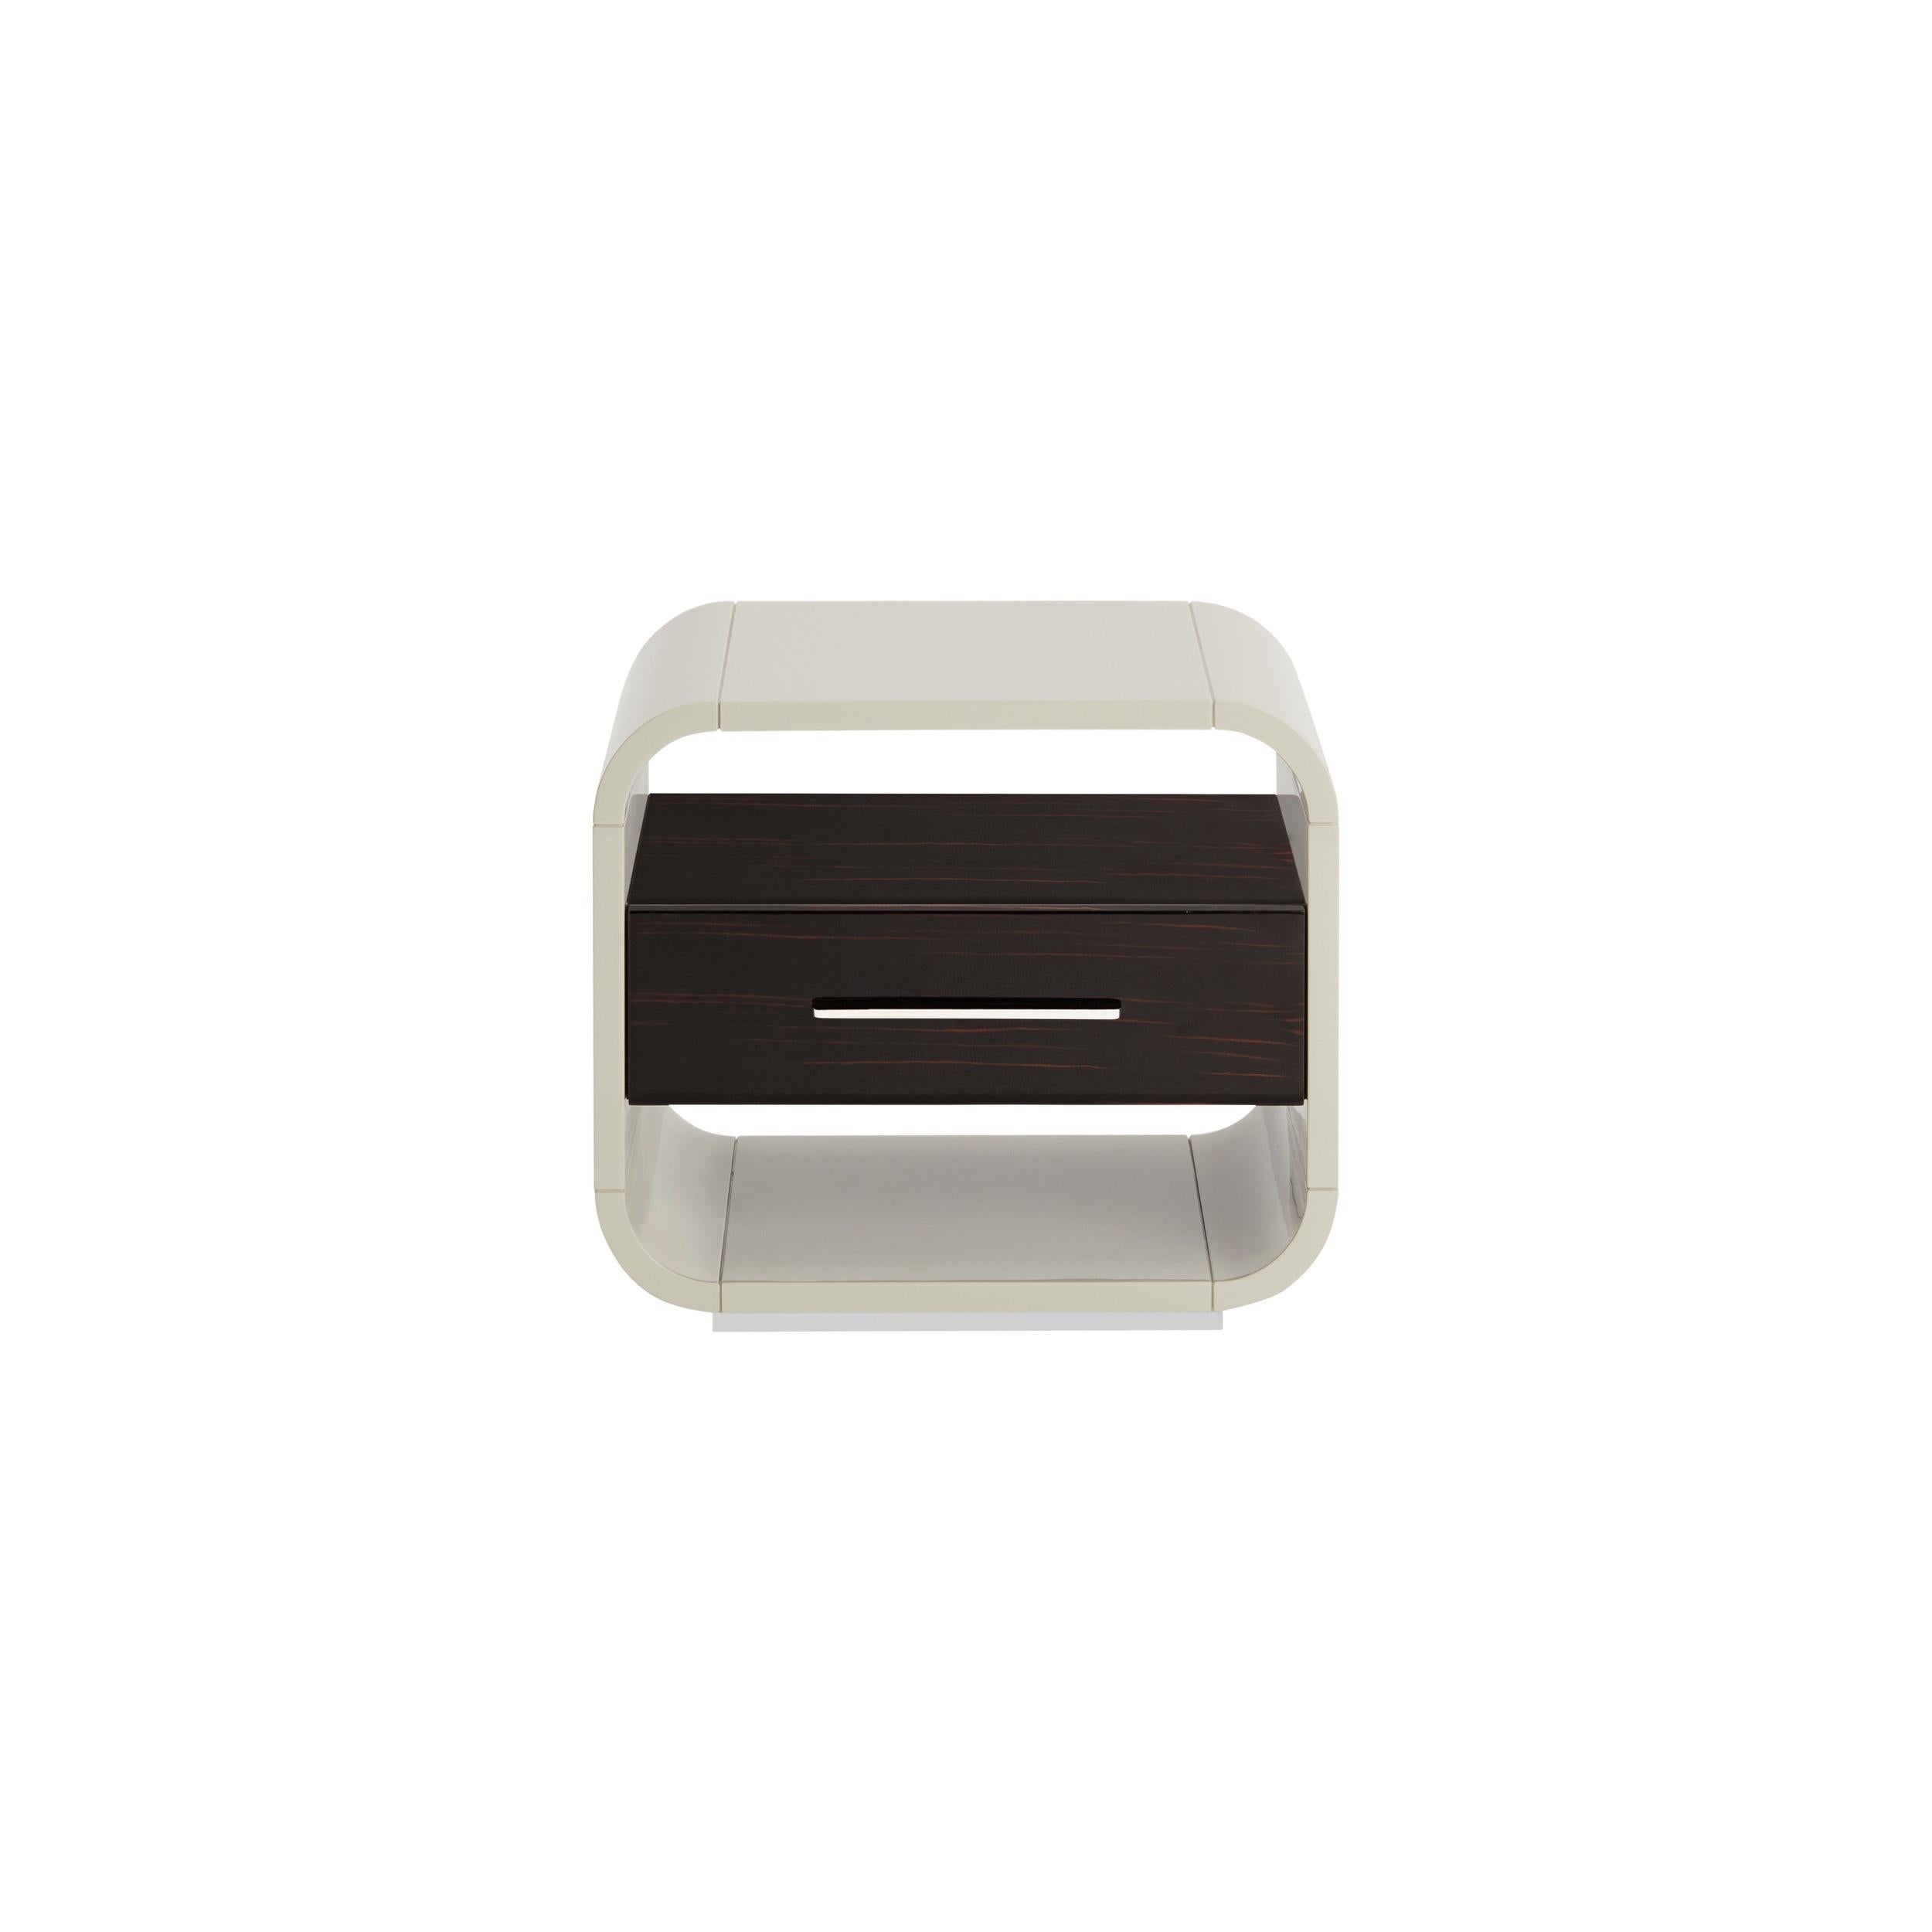 The shaped structure gives the bedside table SIMONE a contemporary style, made with a lacquered wooden structure with an integrated drawer in veneered wood.‎ Simone is characterized by customizable details and matching or contrasting finishes on the